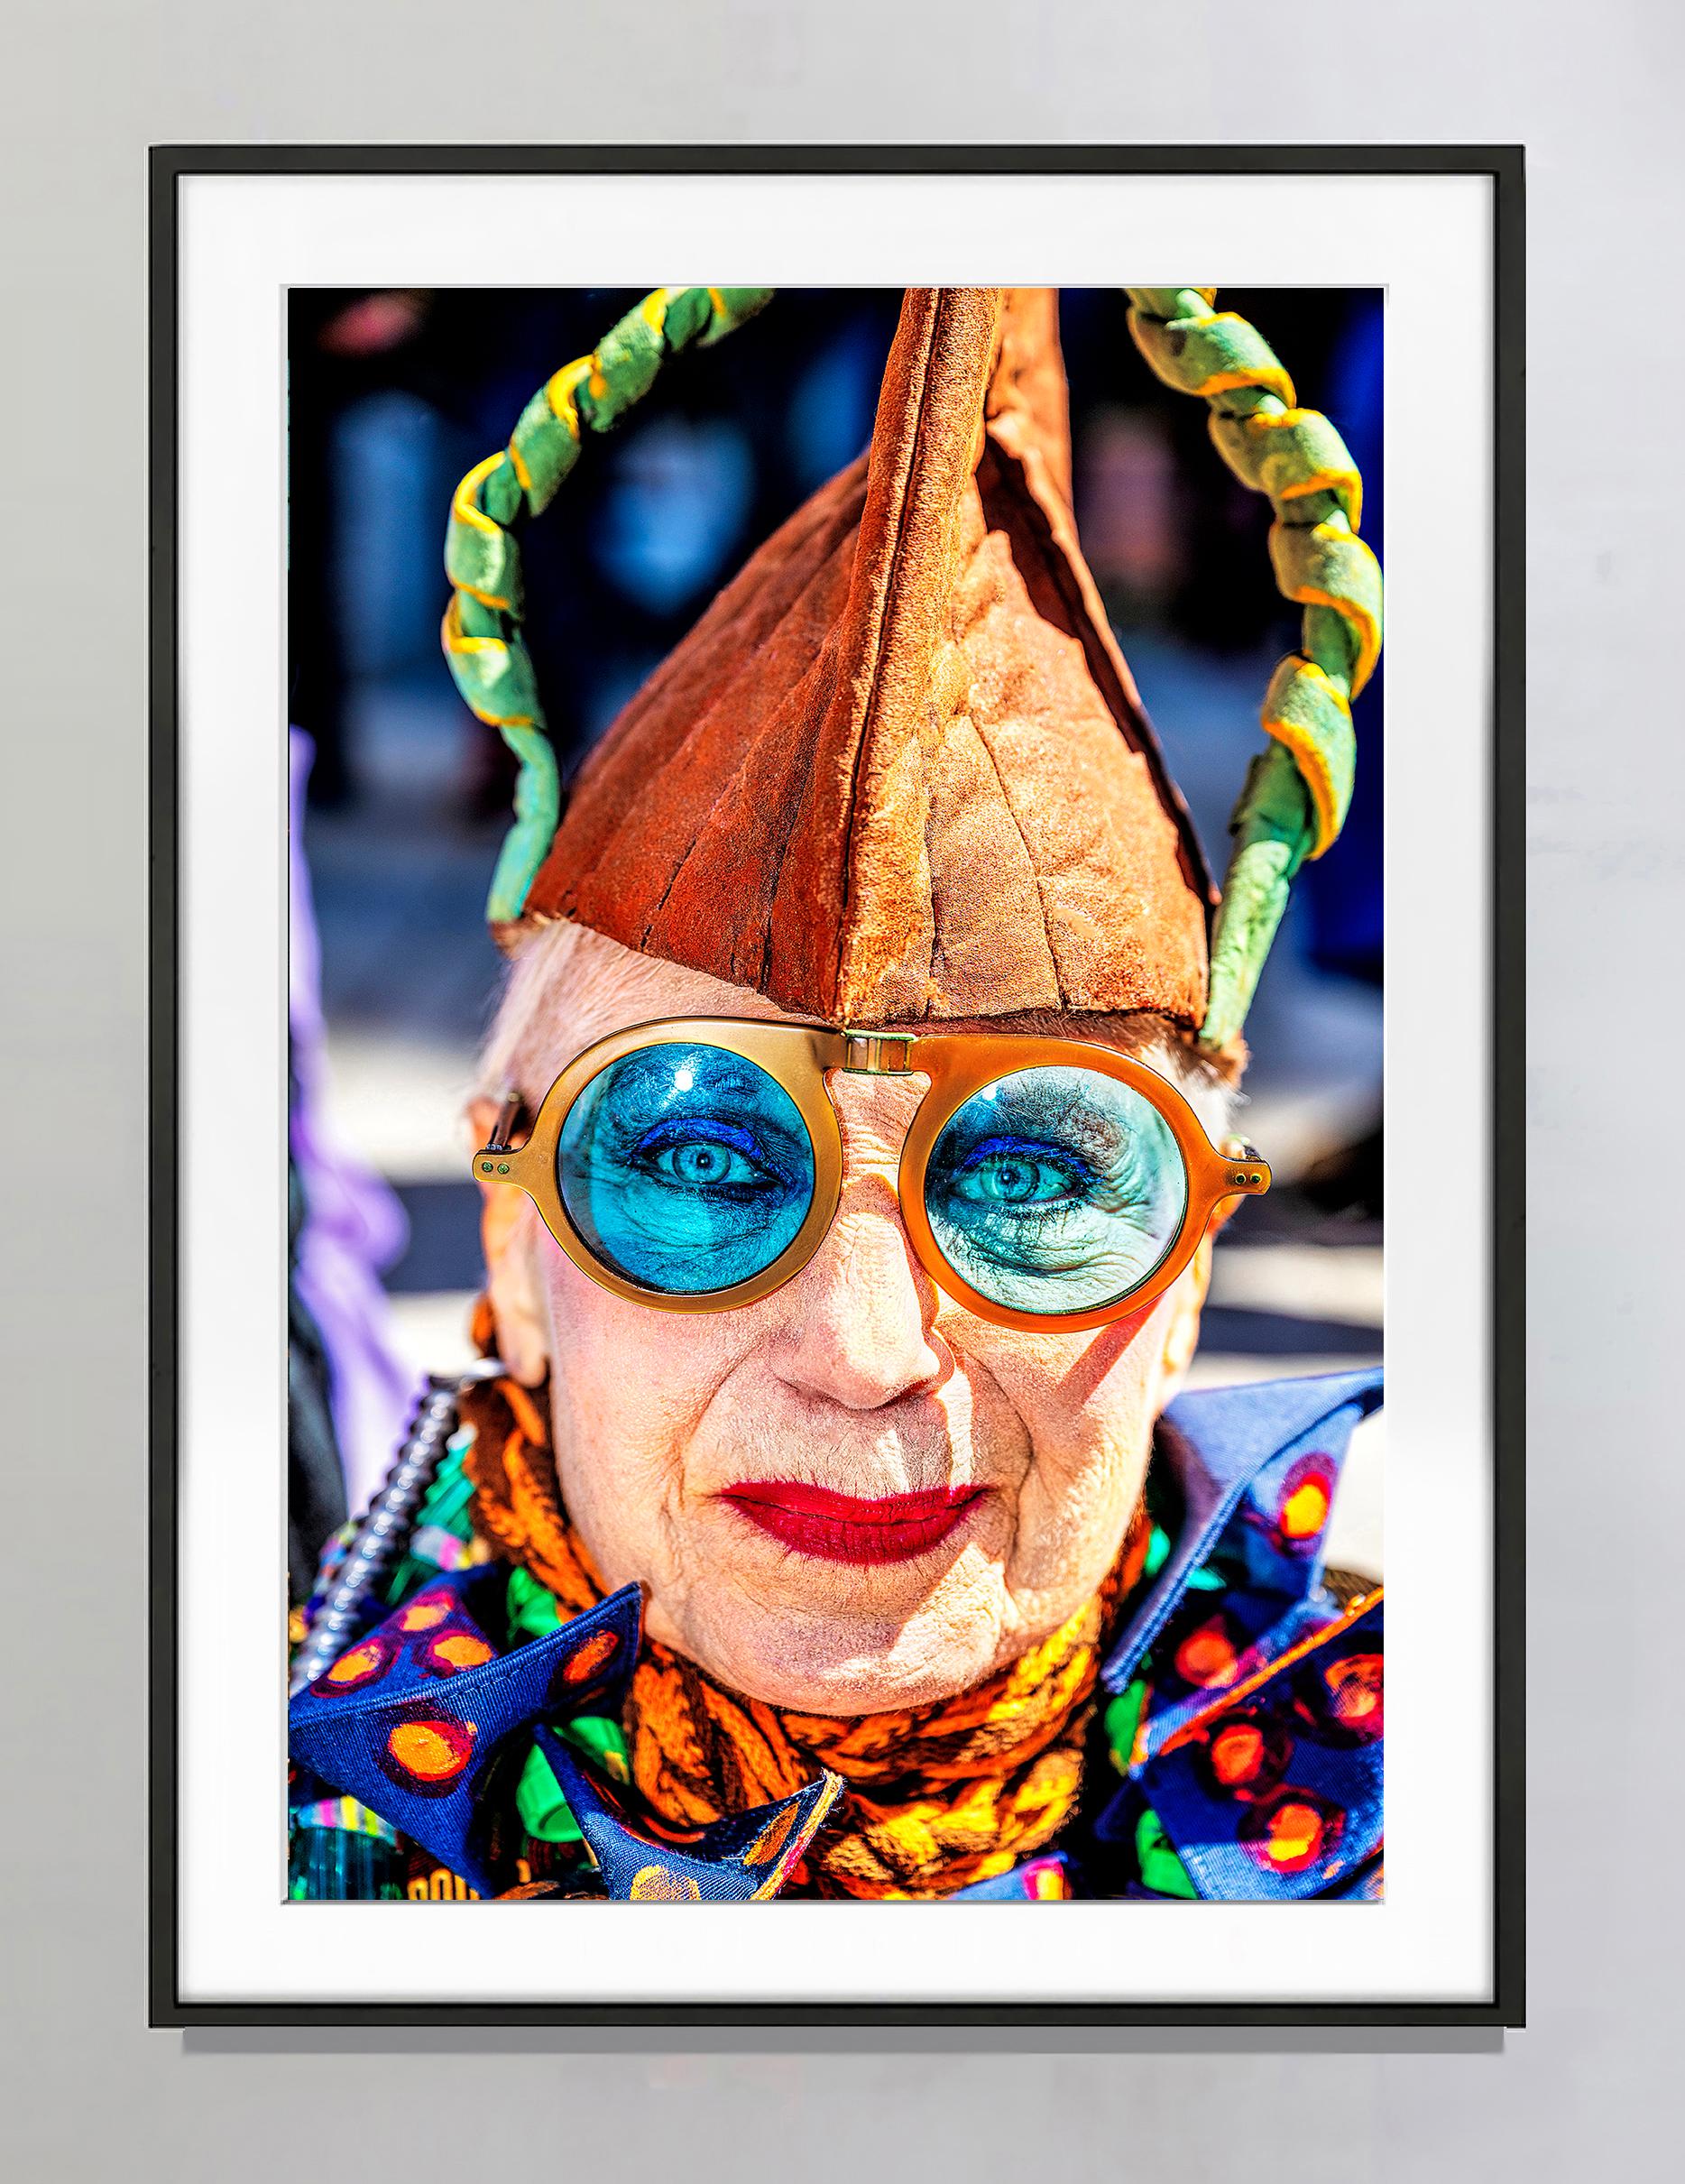 Whimsical Woman with Colorfully Fanciful Outfit Blue Eyeglasses - Photograph by Mitchell Funk